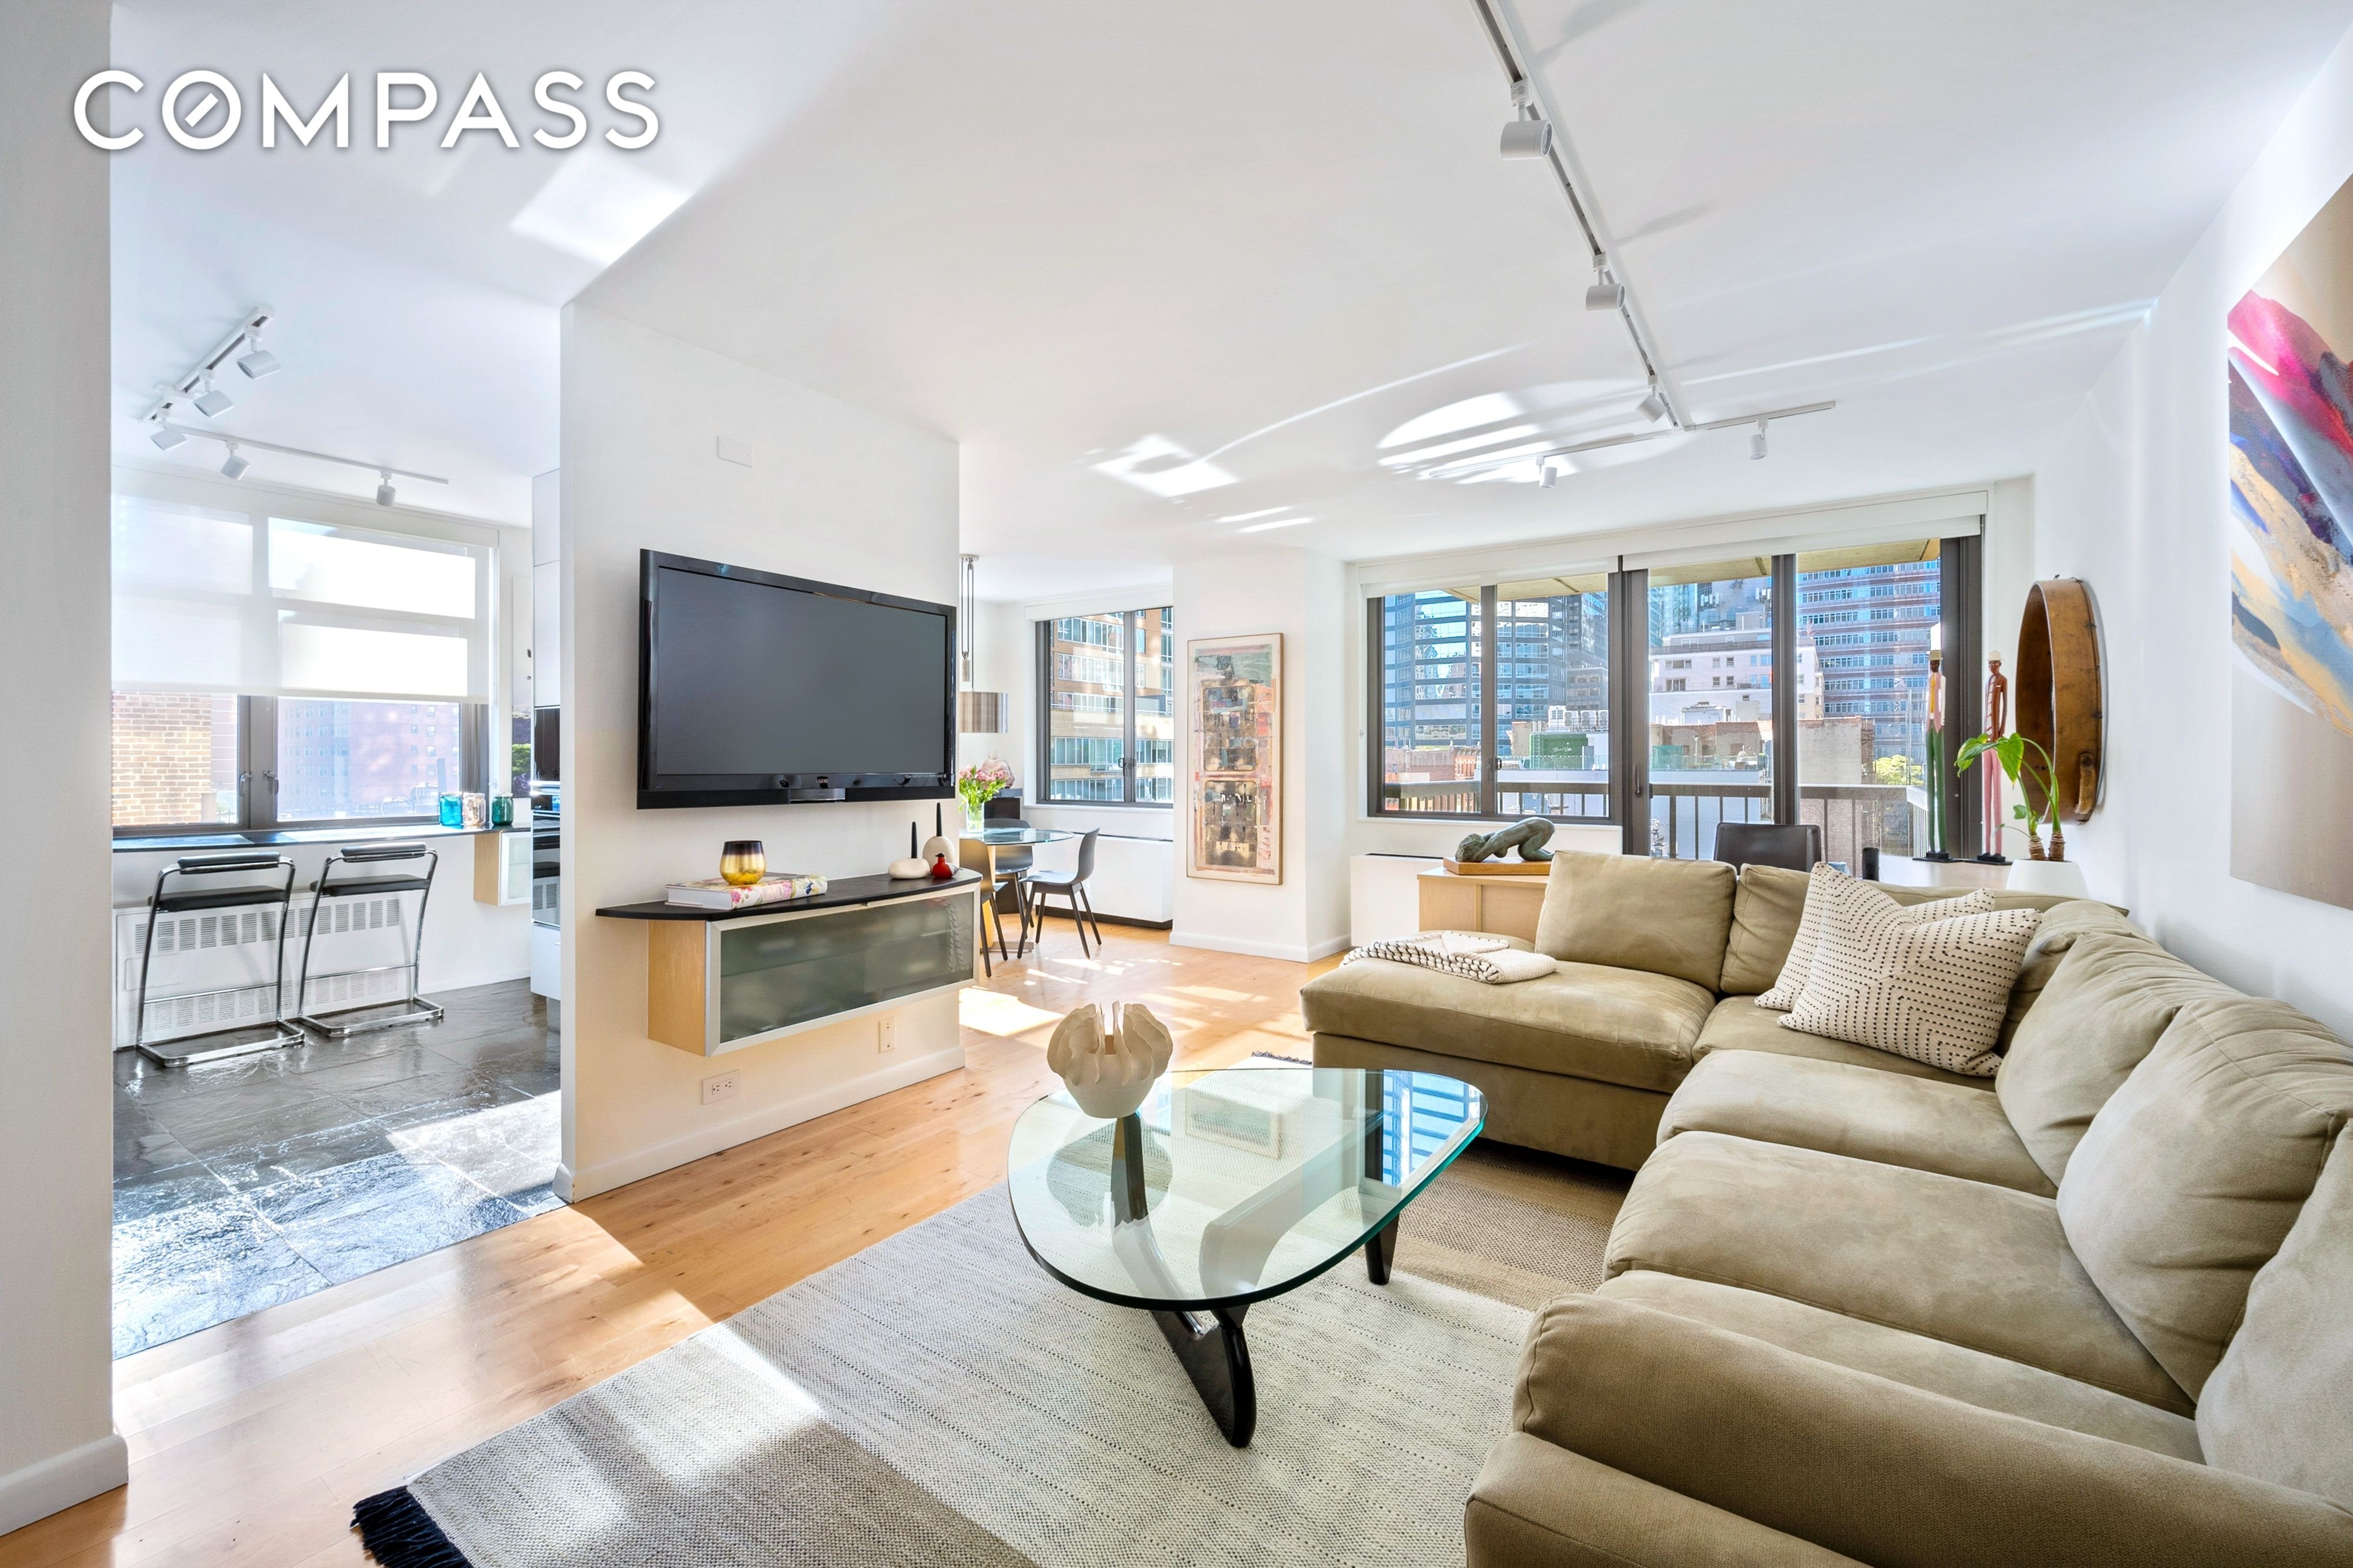 Property at Connaught Tower, 300 E 54TH ST, 6D Midtown East, New York, NY 10022